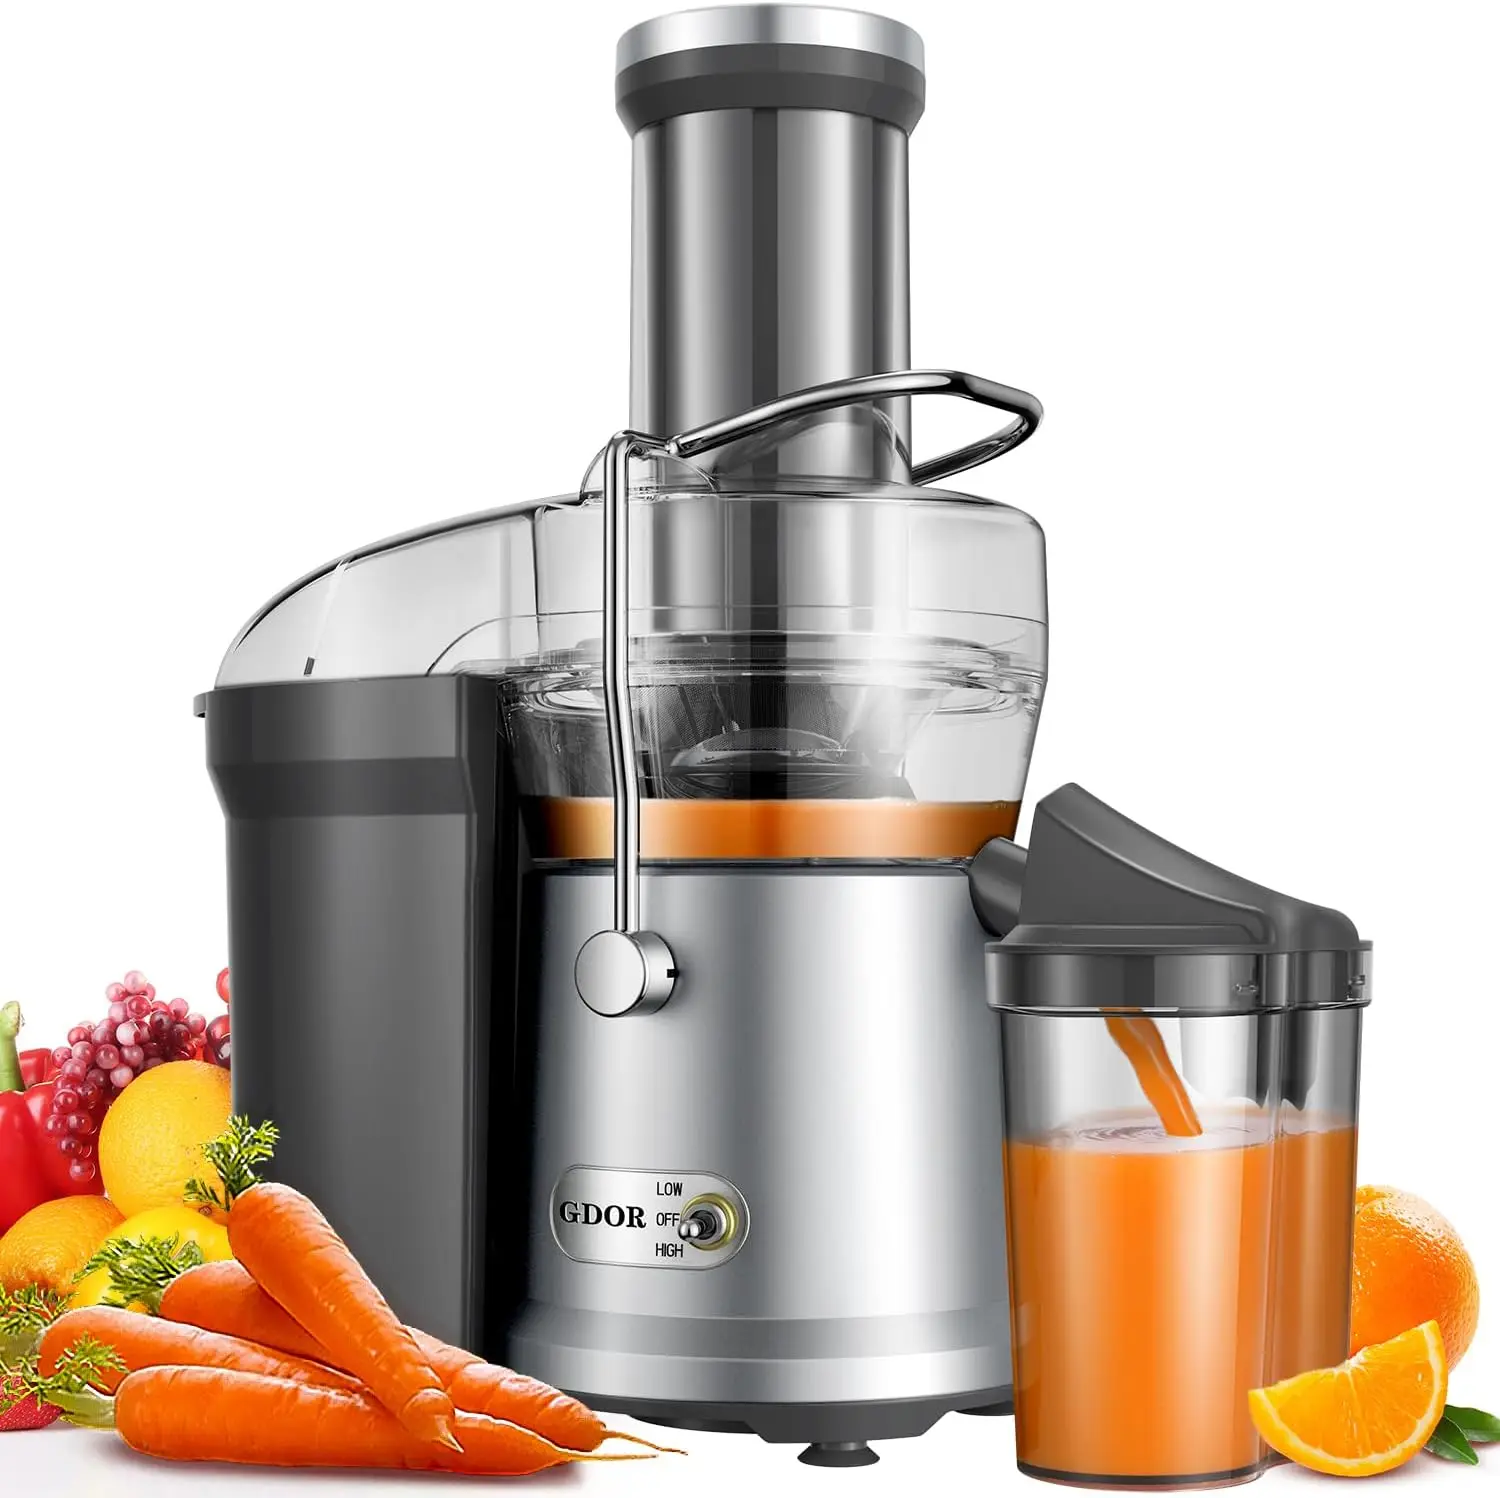 

GDOR Juicer with Larger 3.2" Feed Chute, Enhanced Cutting System, Centrifugal Juice Extractor Maker with Heavy Duty Full Co Eye